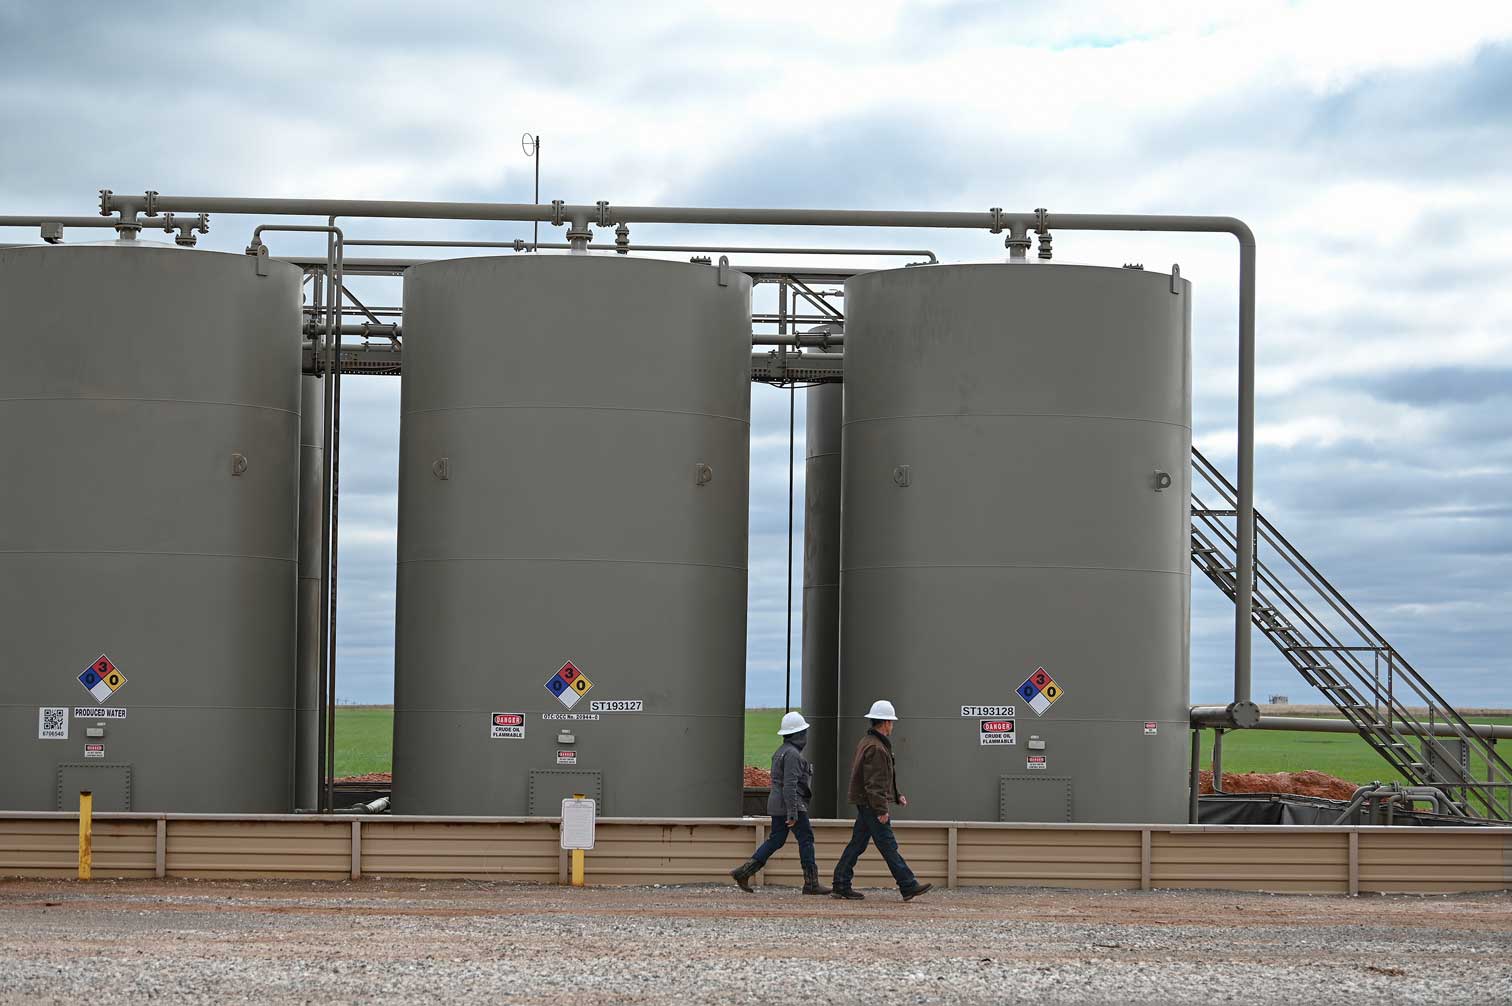 Two workers wearing jeans, dark jackets, and white hard hats while walking in front of three large metal tanks